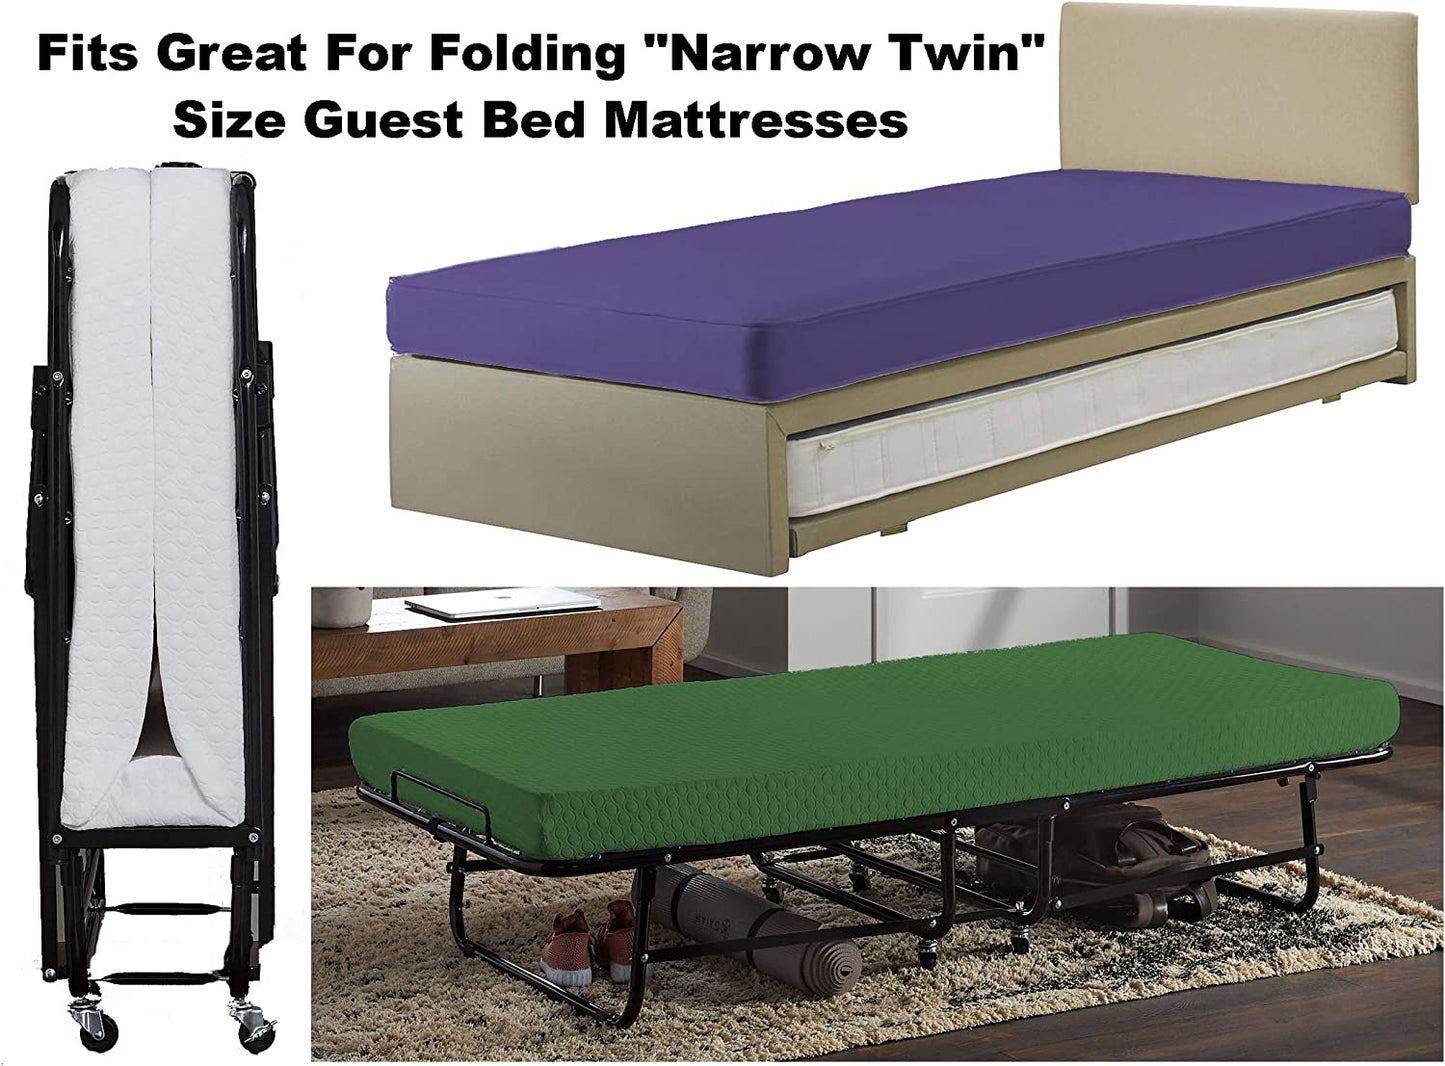 Gilbins Cot Size 30" x 75" Fitted Sheet, Made of Ultra Soft Cotton, Perfect for Camp Bunk Beds / RVs / Guest Beds Purple